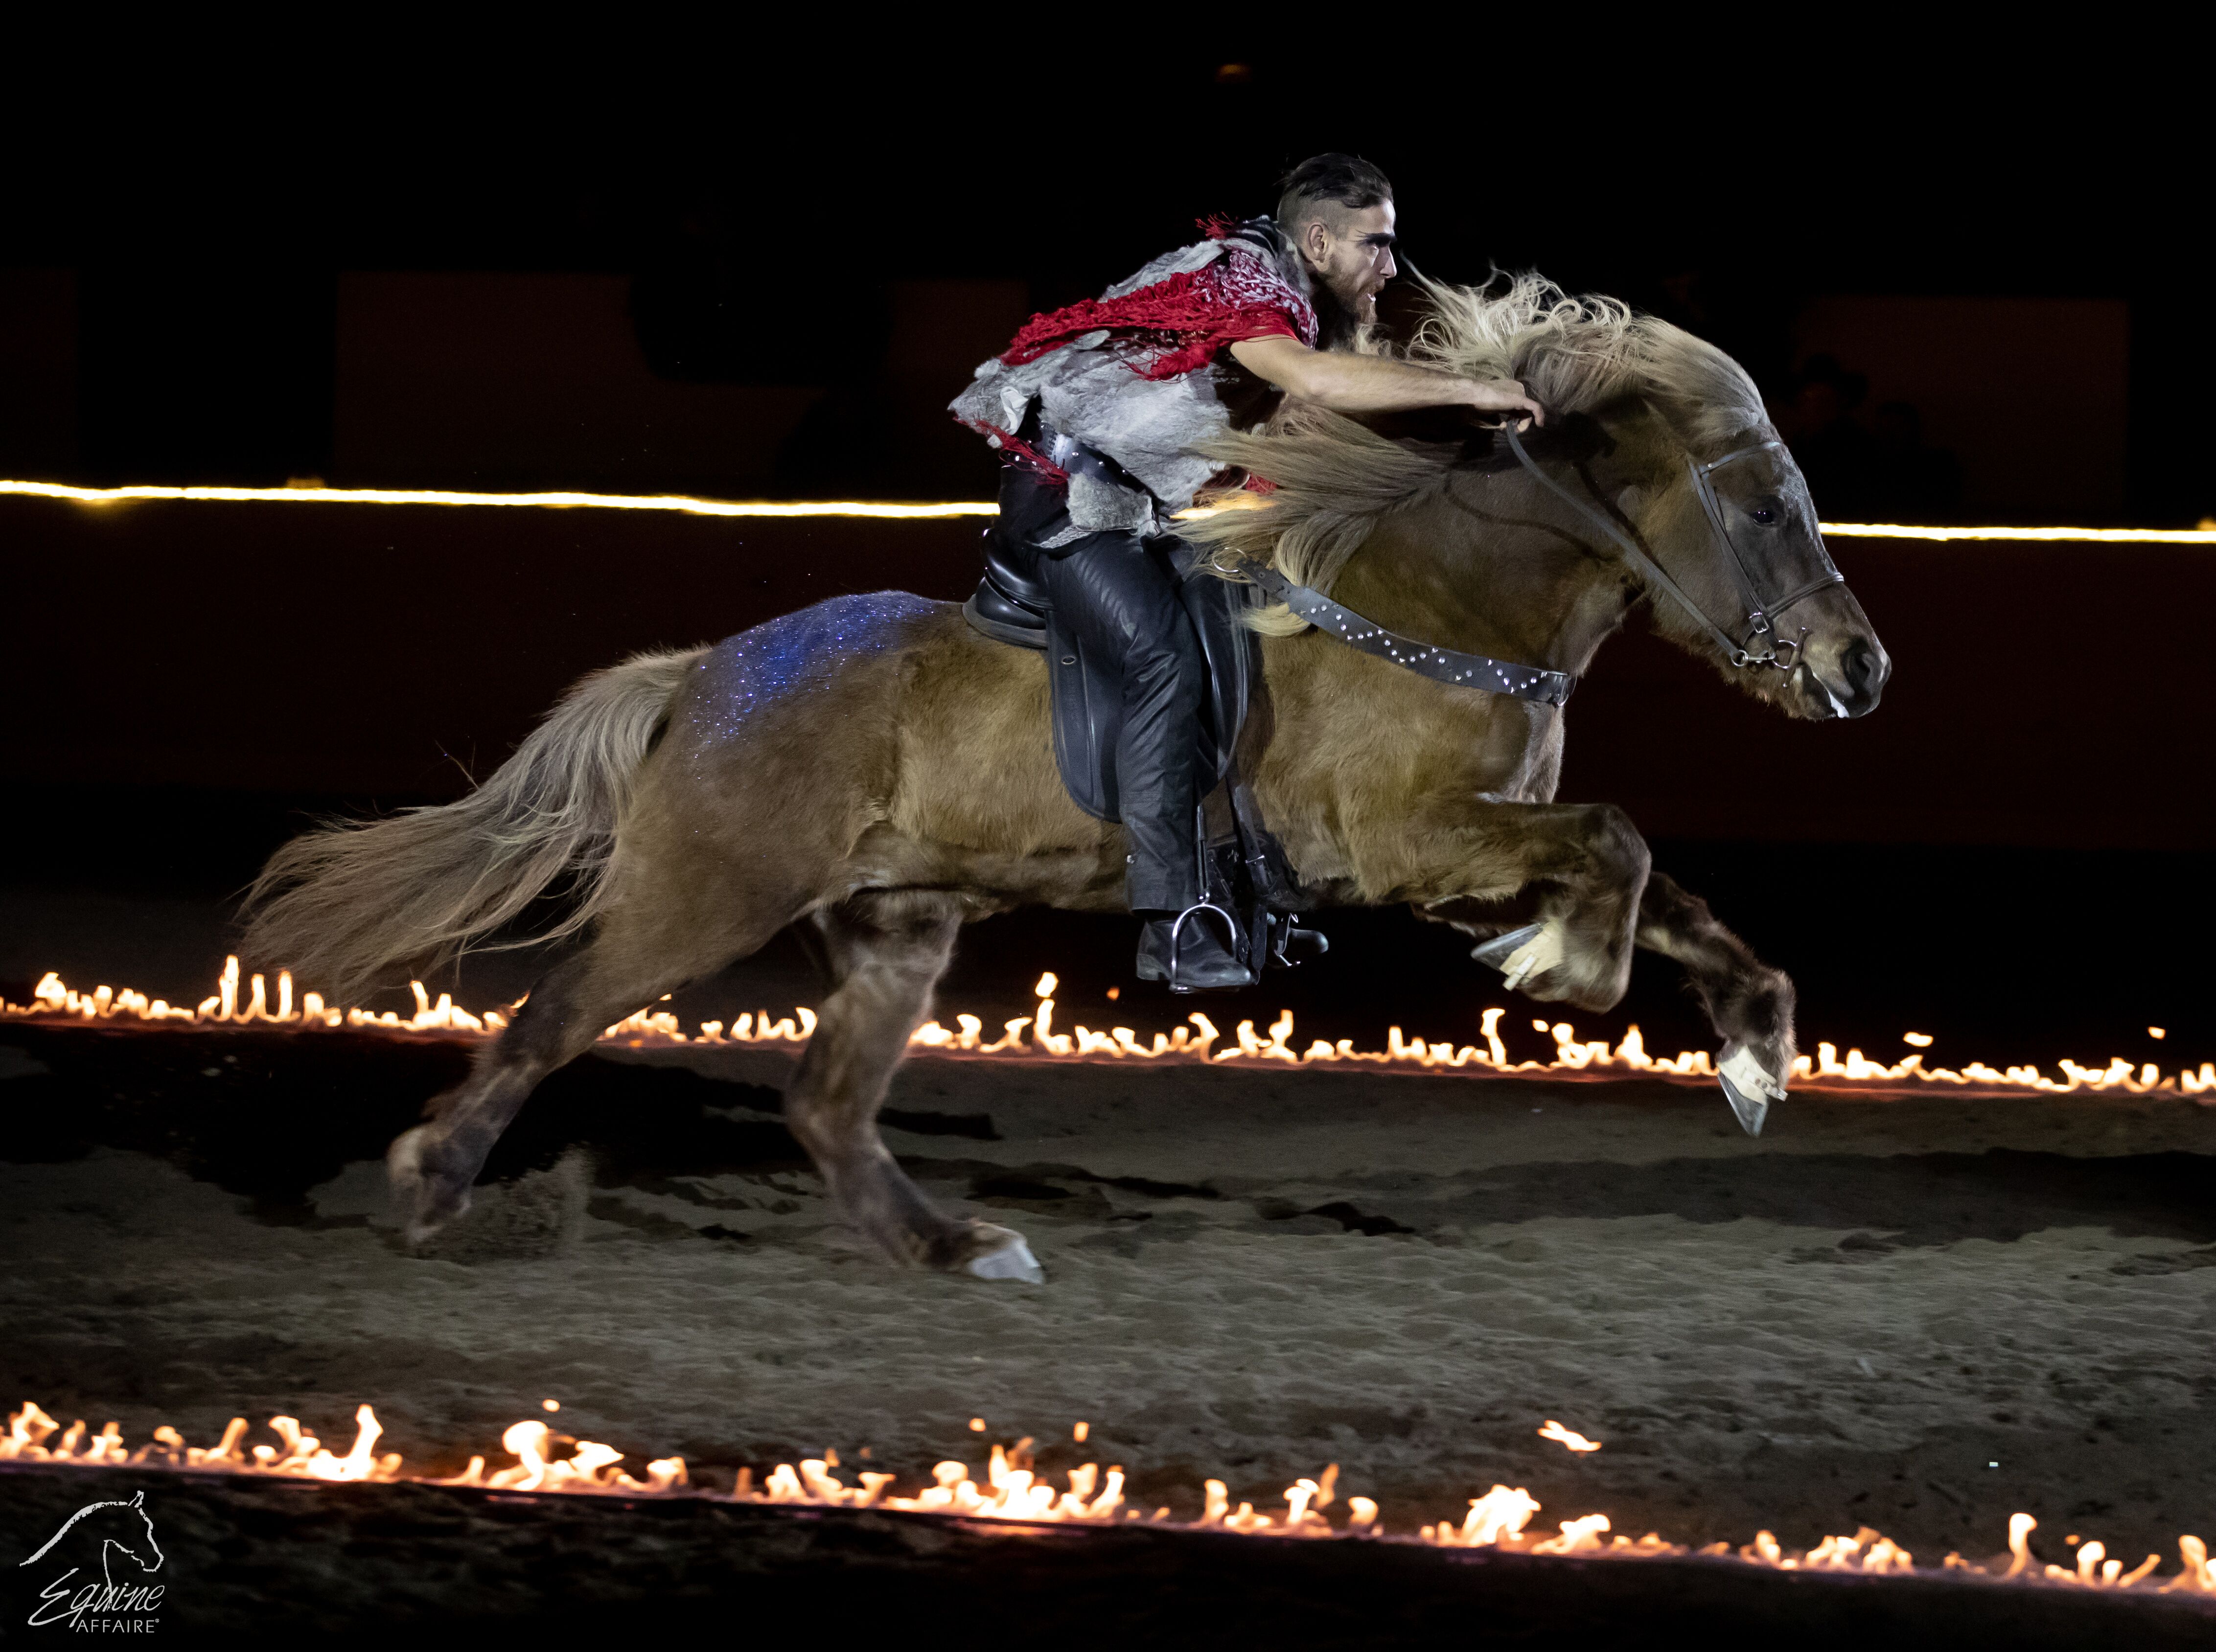 Man in cowboy costume on horseback galloping through flames at Equine Affaire's Fantasia event